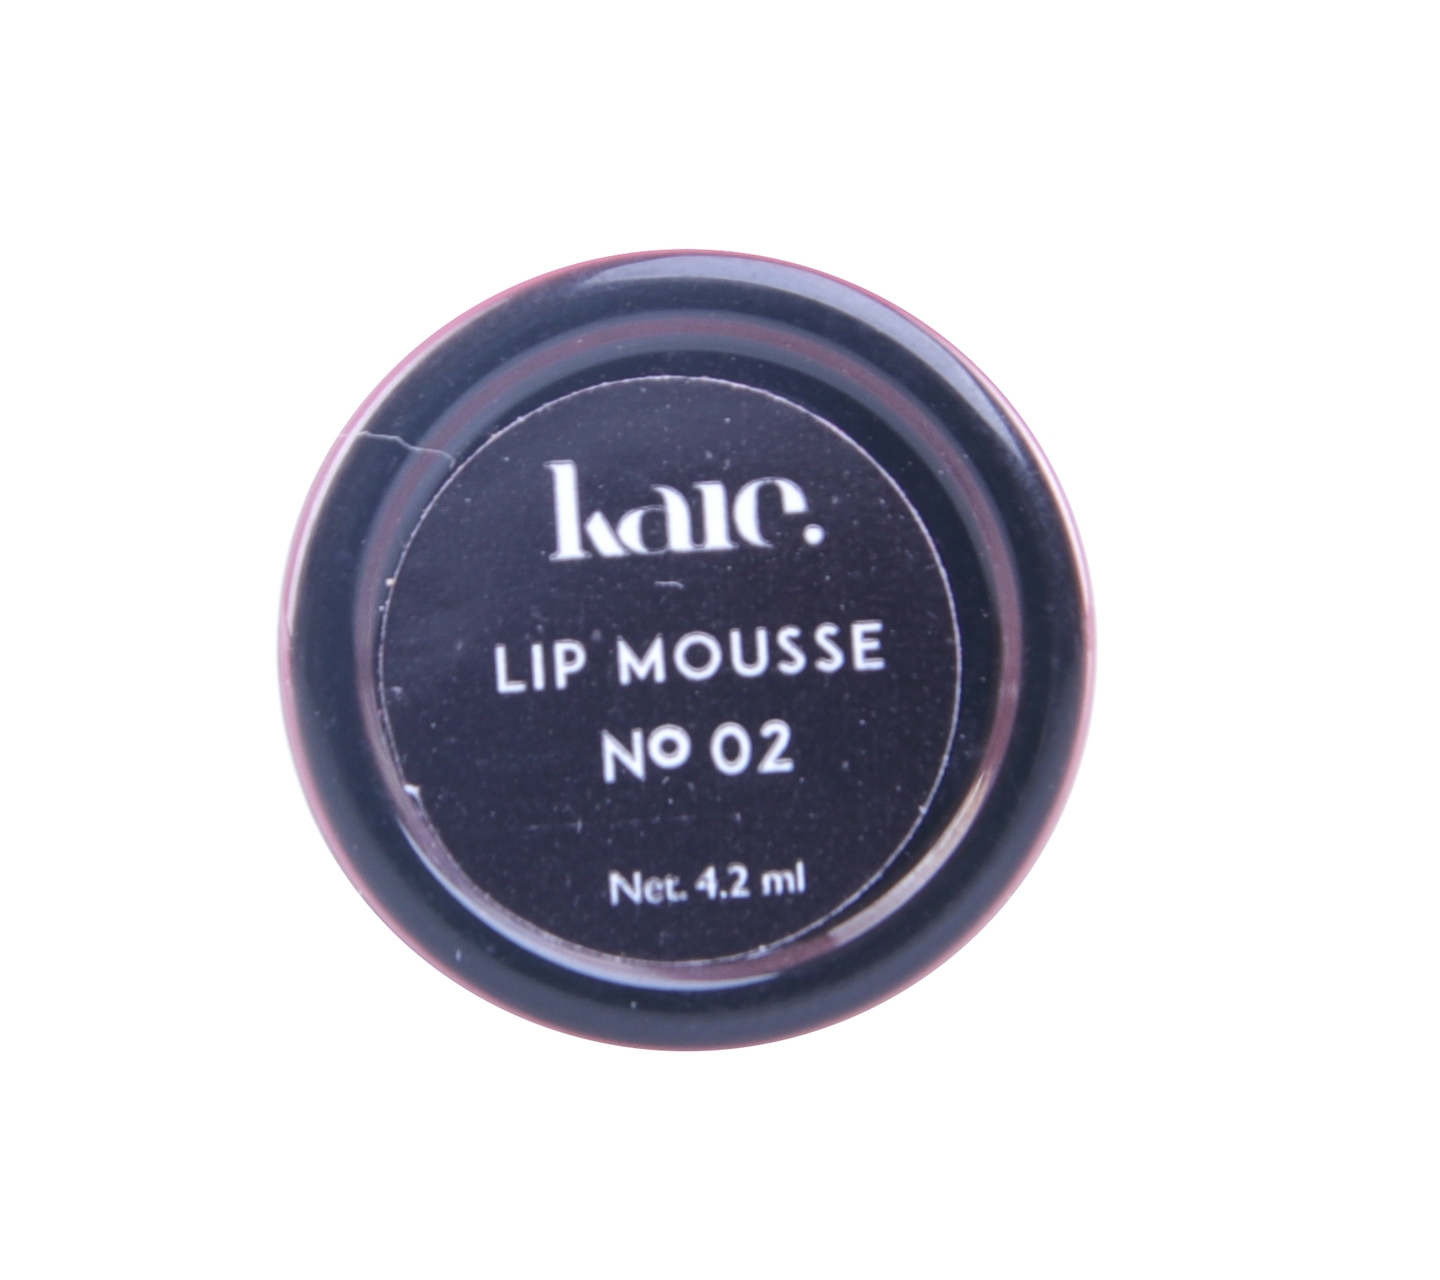 kaie No. 2 lip mouse Lips